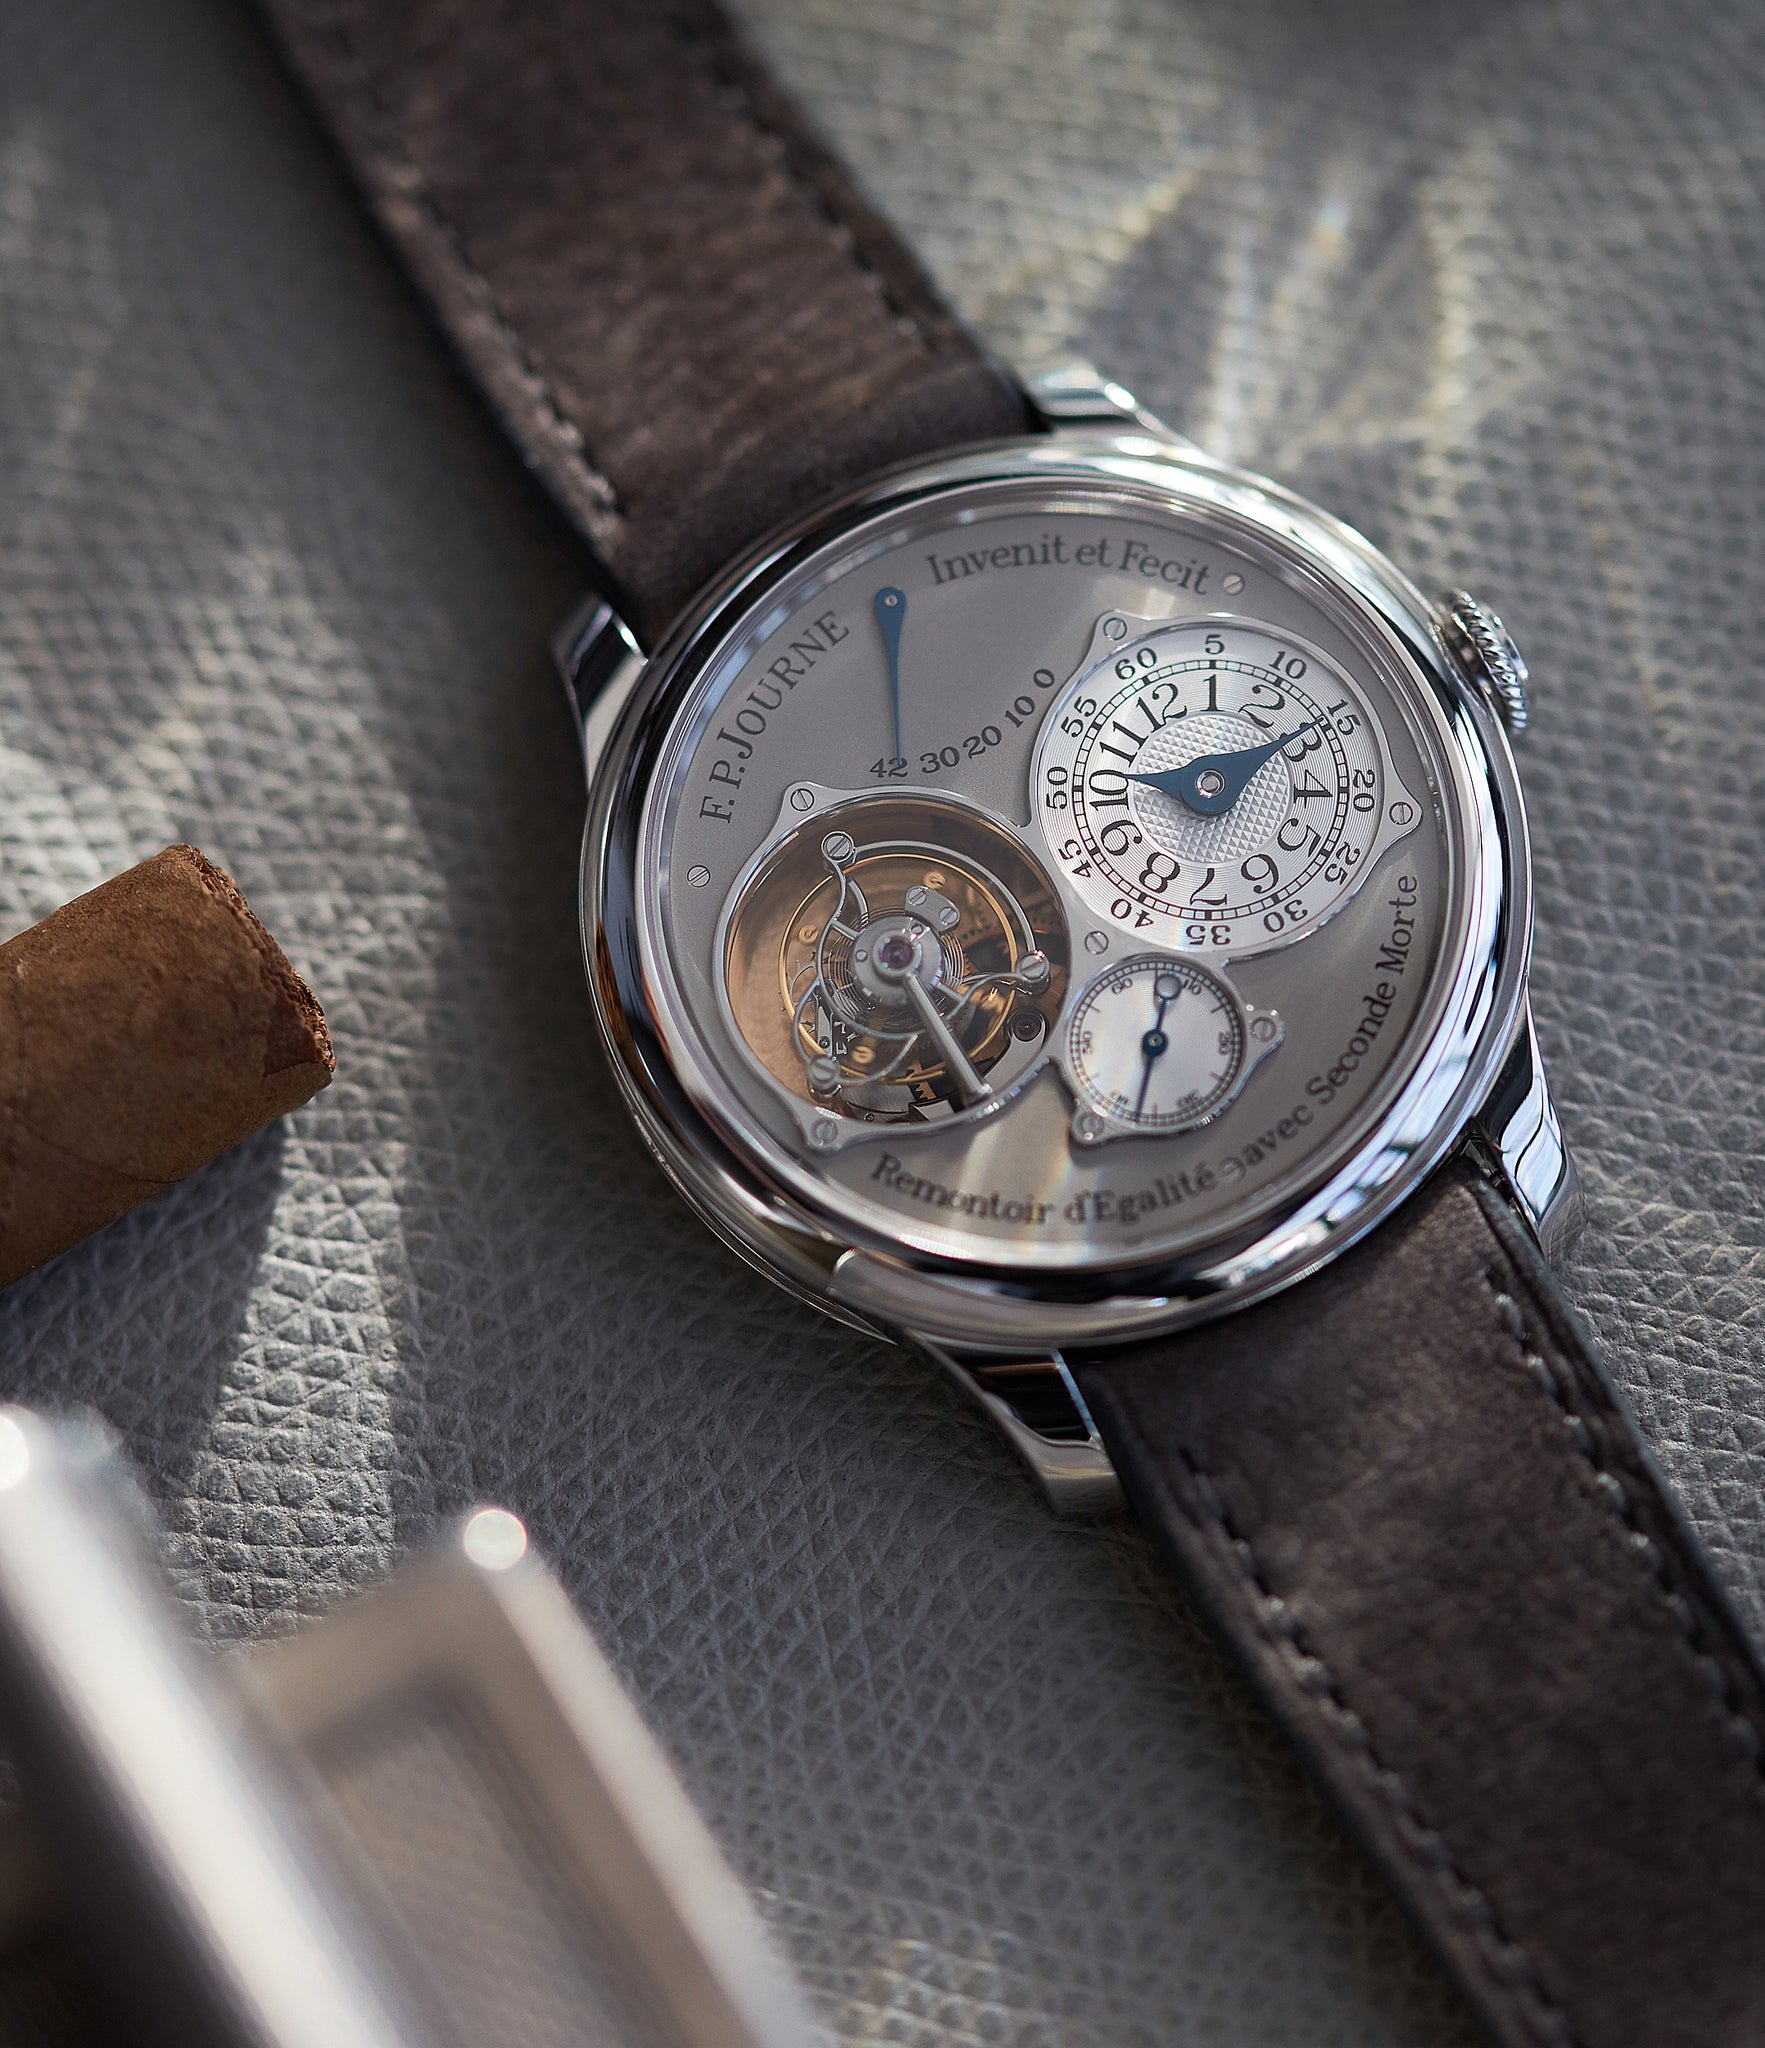 F. P. Journe Tourbillon Souverain TN dead-beat seconds 40mm platinum pre-owned watch for sale online at A Collected Man London UK specialist of rare watches